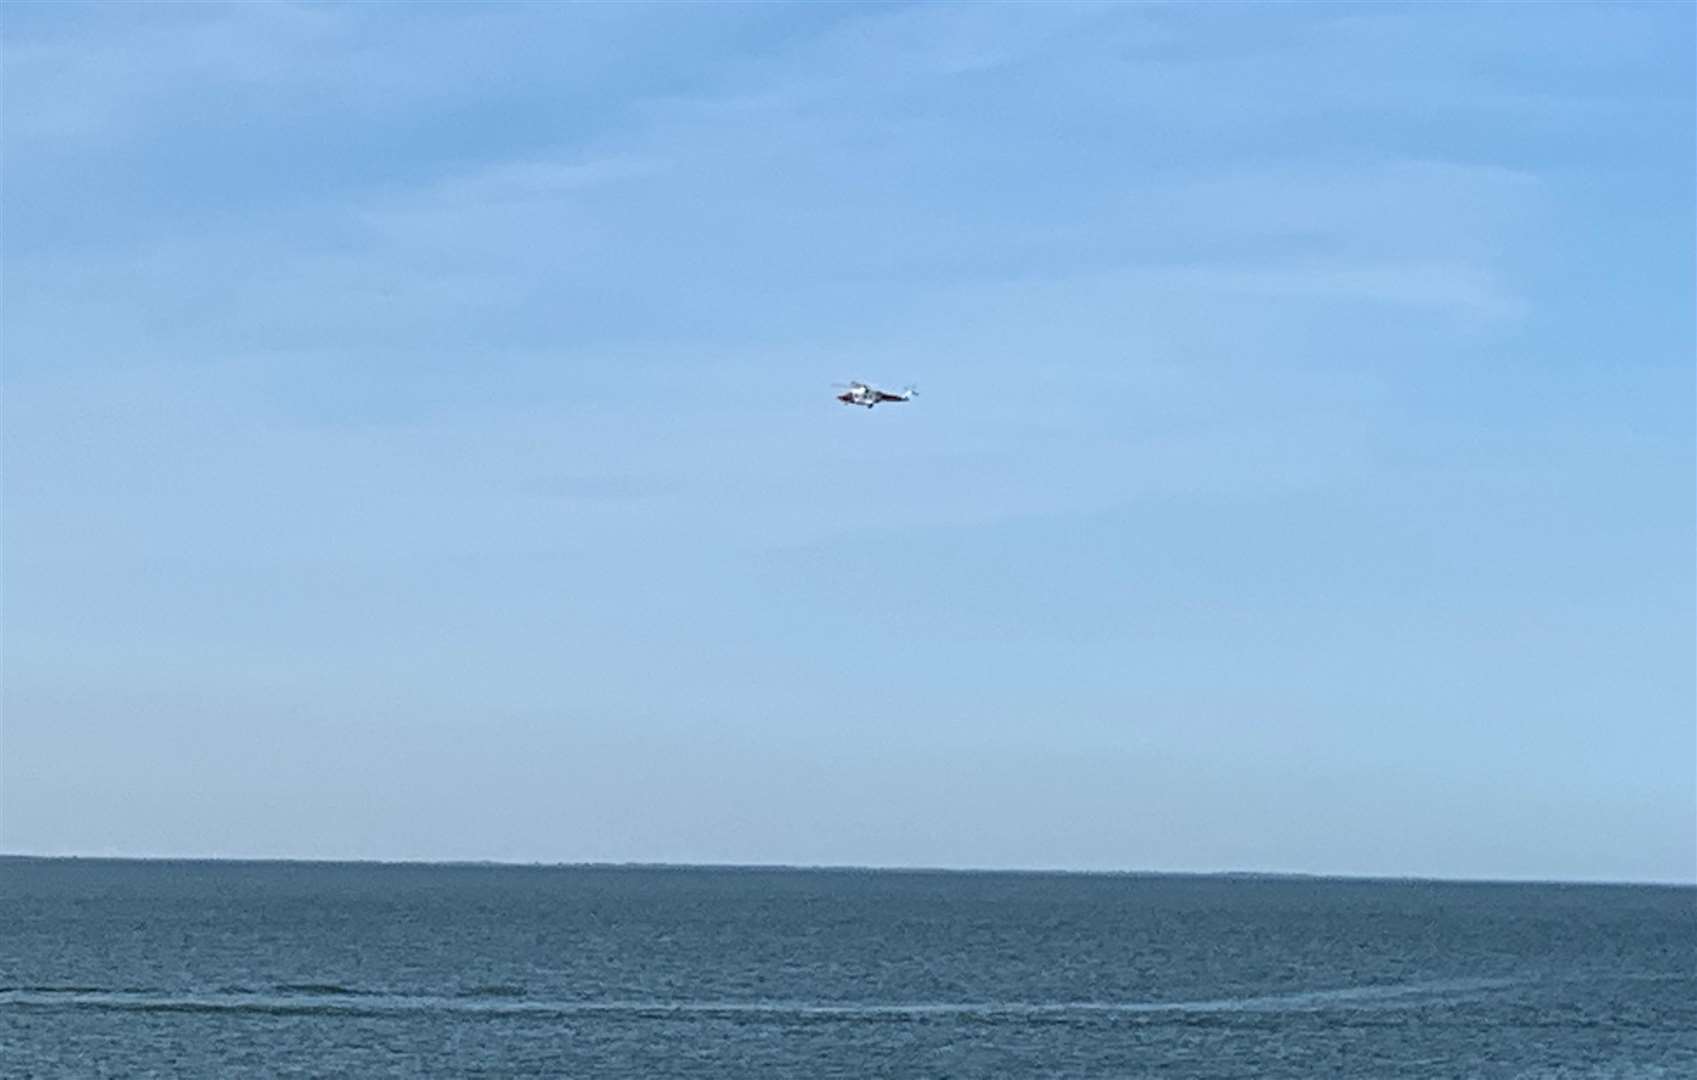 Coastguard helicopter spotted over Sheerness